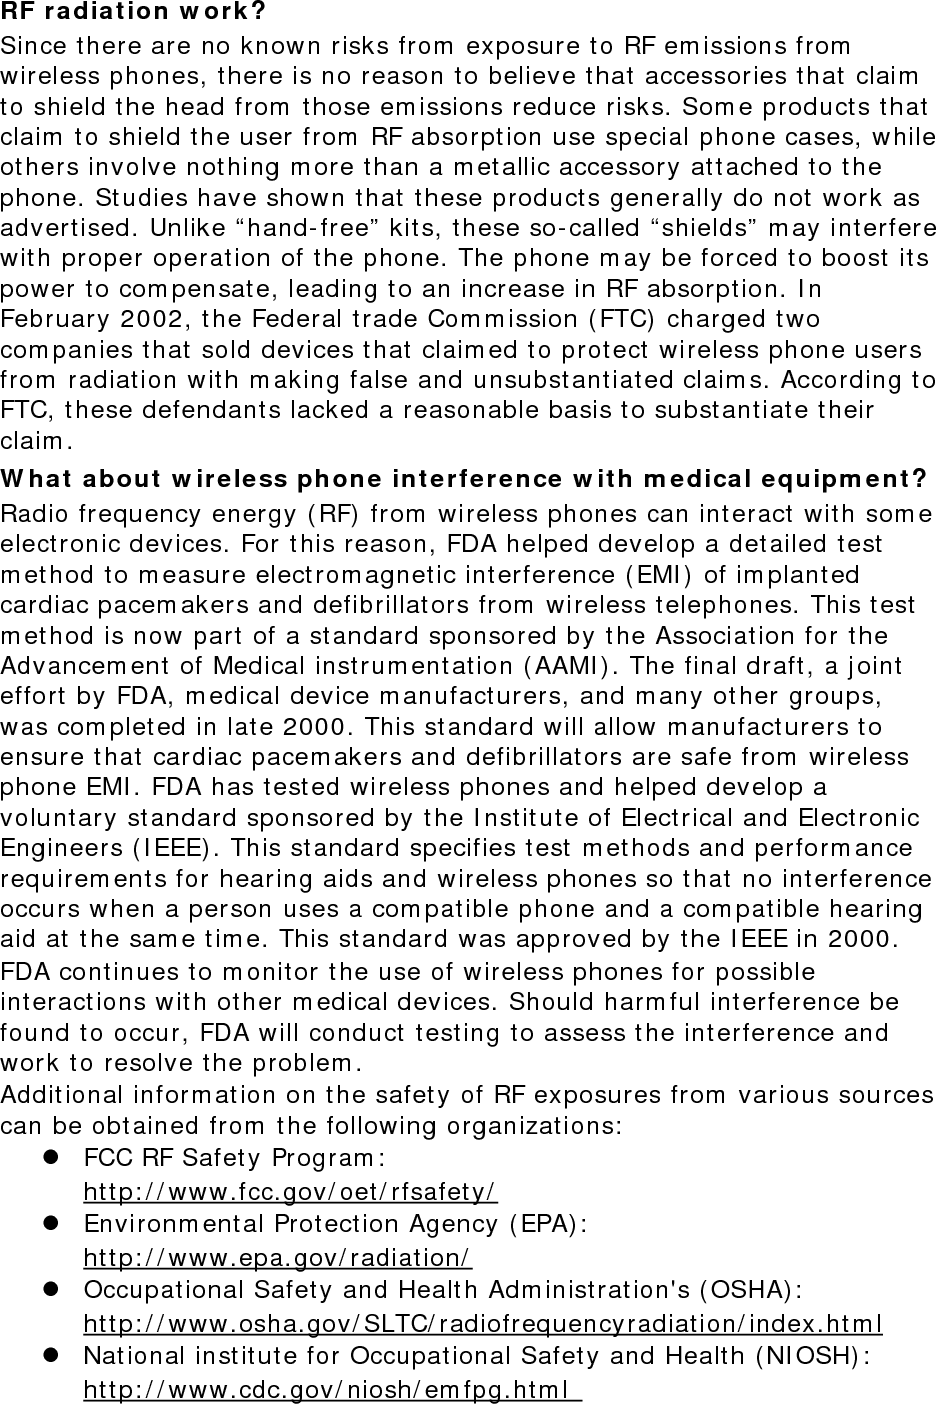 RF radiation work? Since there are no known risks from exposure to RF emissions from wireless phones, there is no reason to believe that accessories that claim to shield the head from those emissions reduce risks. Some products that claim to shield the user from RF absorption use special phone cases, while others involve nothing more than a metallic accessory attached to the phone. Studies have shown that these products generally do not work as advertised. Unlike “hand-free” kits, these so-called “shields” may interfere with proper operation of the phone. The phone may be forced to boost its power to compensate, leading to an increase in RF absorption. In February 2002, the Federal trade Commission (FTC) charged two companies that sold devices that claimed to protect wireless phone users from radiation with making false and unsubstantiated claims. According to FTC, these defendants lacked a reasonable basis to substantiate their claim. What about wireless phone interference with medical equipment? Radio frequency energy (RF) from wireless phones can interact with some electronic devices. For this reason, FDA helped develop a detailed test method to measure electromagnetic interference (EMI) of implanted cardiac pacemakers and defibrillators from wireless telephones. This test method is now part of a standard sponsored by the Association for the Advancement of Medical instrumentation (AAMI). The final draft, a joint effort by FDA, medical device manufacturers, and many other groups, was completed in late 2000. This standard will allow manufacturers to ensure that cardiac pacemakers and defibrillators are safe from wireless phone EMI. FDA has tested wireless phones and helped develop a voluntary standard sponsored by the Institute of Electrical and Electronic Engineers (IEEE). This standard specifies test methods and performance requirements for hearing aids and wireless phones so that no interference occurs when a person uses a compatible phone and a compatible hearing aid at the same time. This standard was approved by the IEEE in 2000. FDA continues to monitor the use of wireless phones for possible interactions with other medical devices. Should harmful interference be found to occur, FDA will conduct testing to assess the interference and work to resolve the problem. Additional information on the safety of RF exposures from various sources can be obtained from the following organizations: z FCC RF Safety Program:  http://www.fcc.gov/oet/rfsafety/ z Environmental Protection Agency (EPA):  http://www.epa.gov/radiation/ z Occupational Safety and Health Administration&apos;s (OSHA):        http://www.osha.gov/SLTC/radiofrequencyradiation/index.html z National institute for Occupational Safety and Health (NIOSH):  http://www.cdc.gov/niosh/emfpg.html  